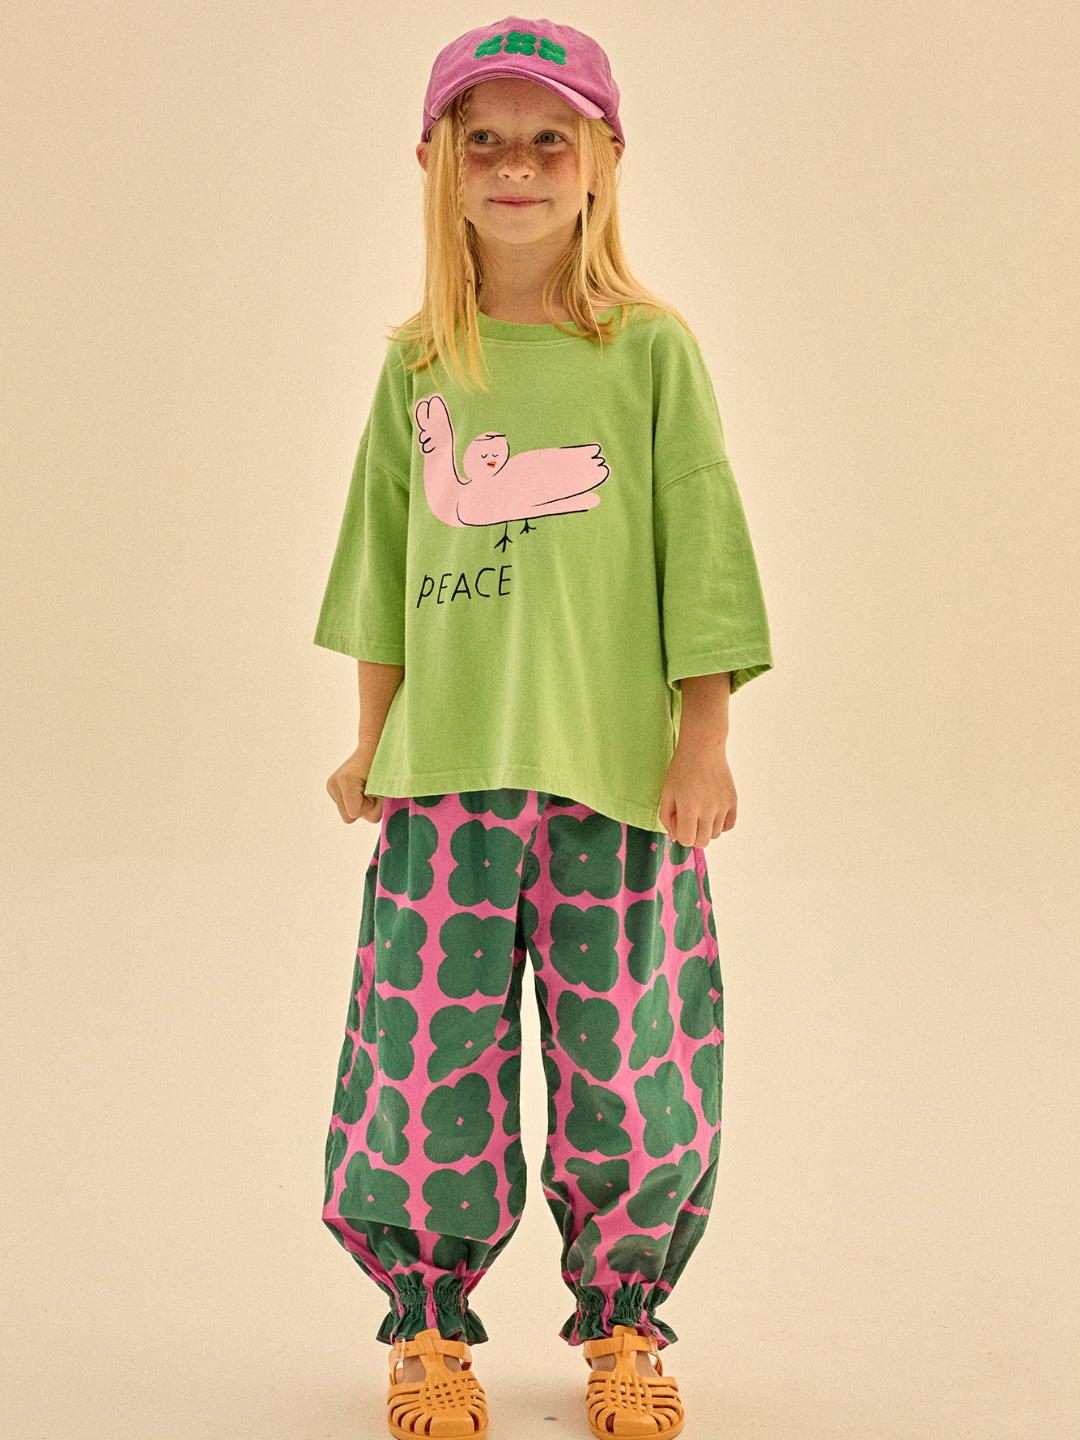 Child wearing Clover Pull-on Pants with a pink and green baseball hat, pink and green tshirt, and orange sandals.